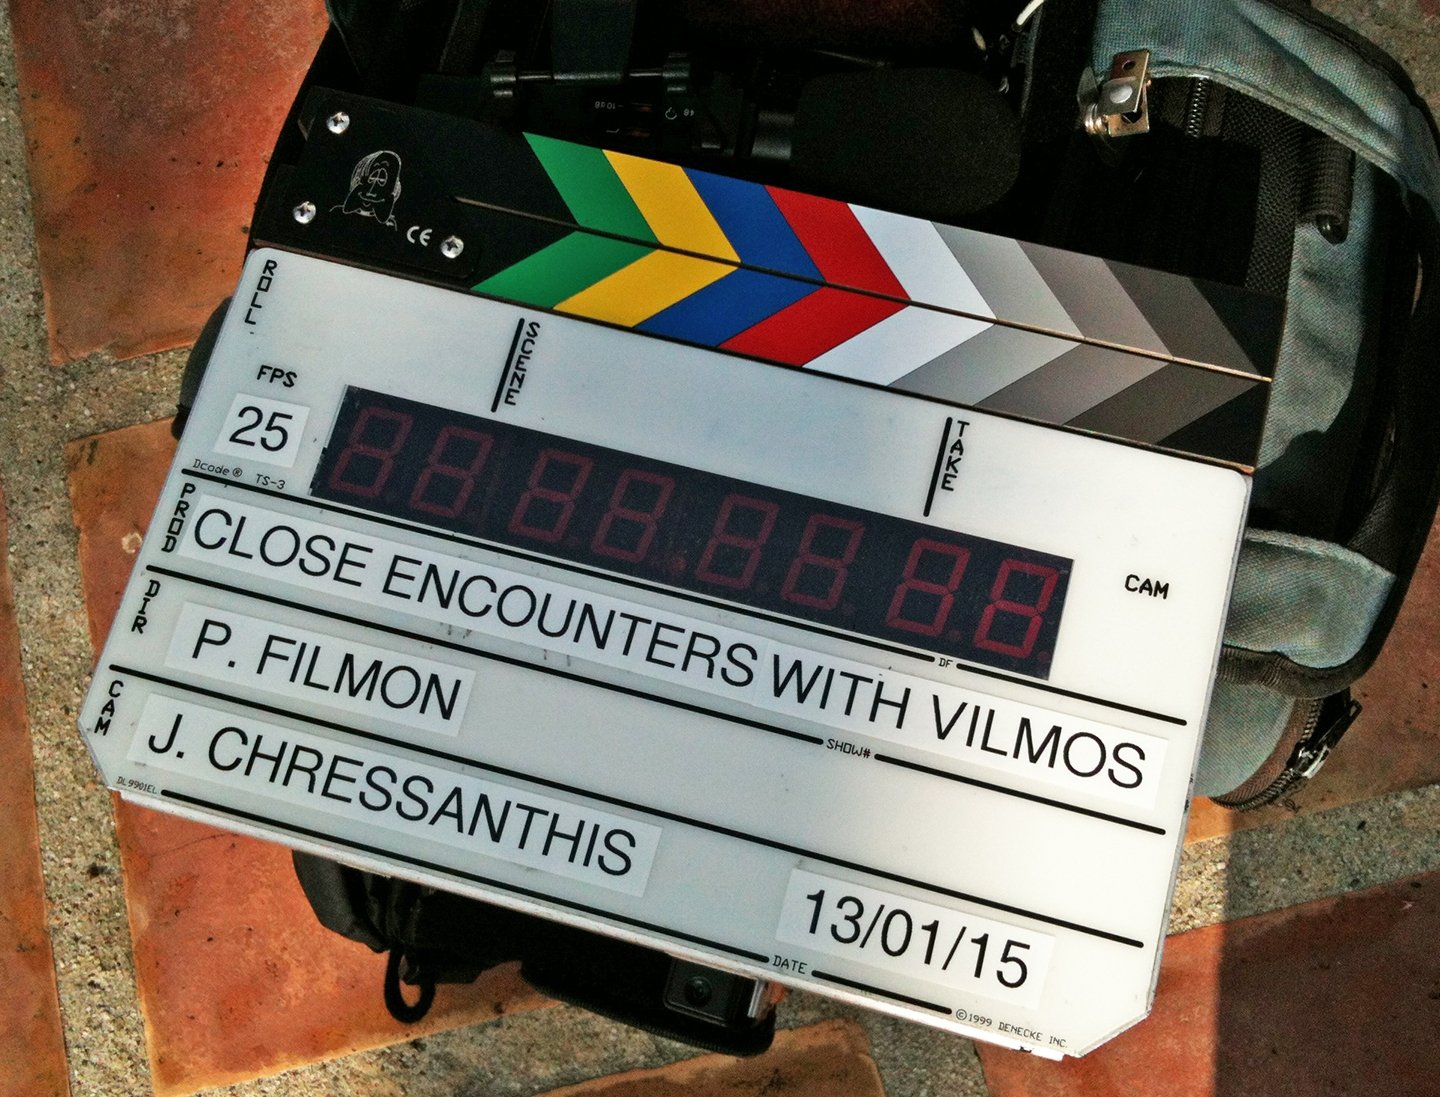 The slate at subject Peter Fonda's home, marking the first day of shooting in the U.S. Photo by the filmmaker